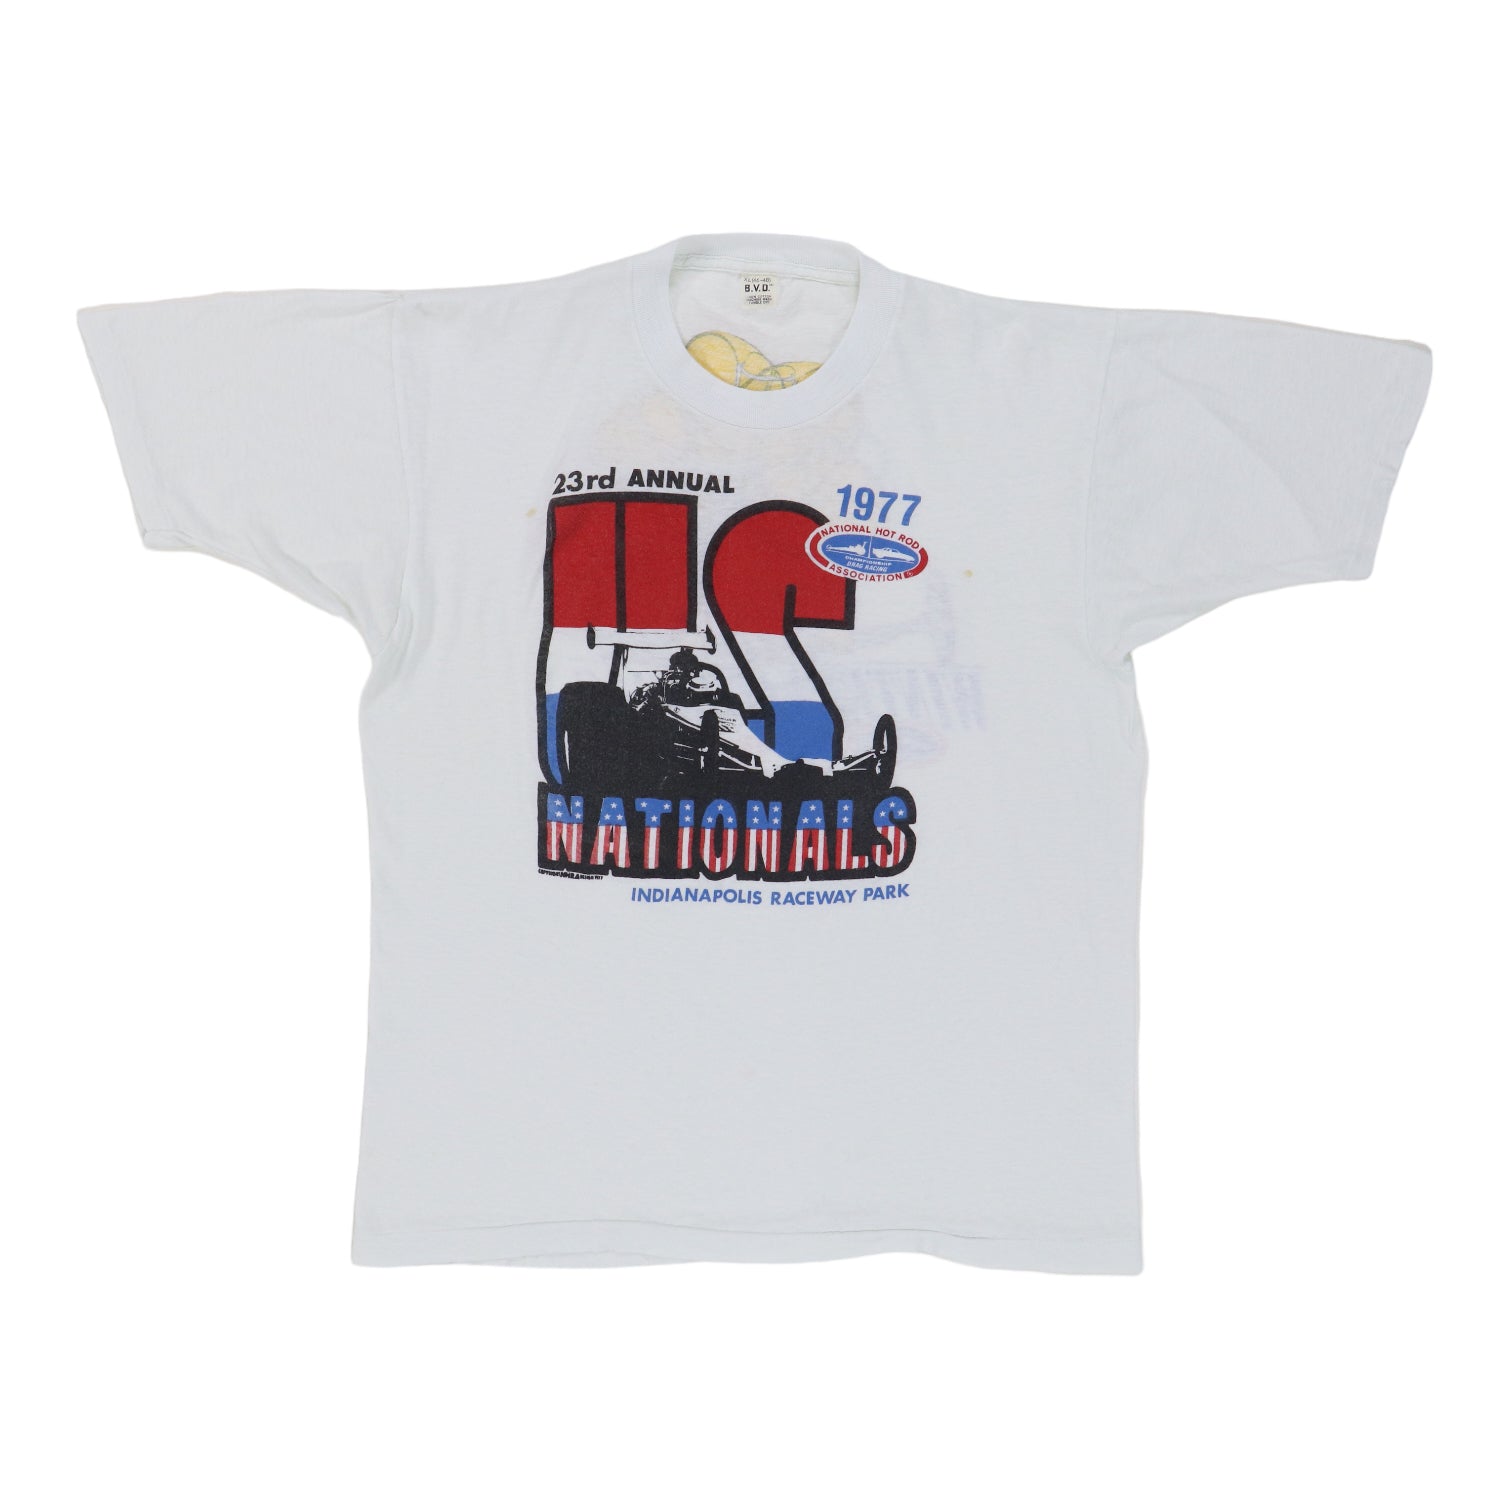 Wyco Vintage 1977 NHRA 23rd Annual Nationals Shirt